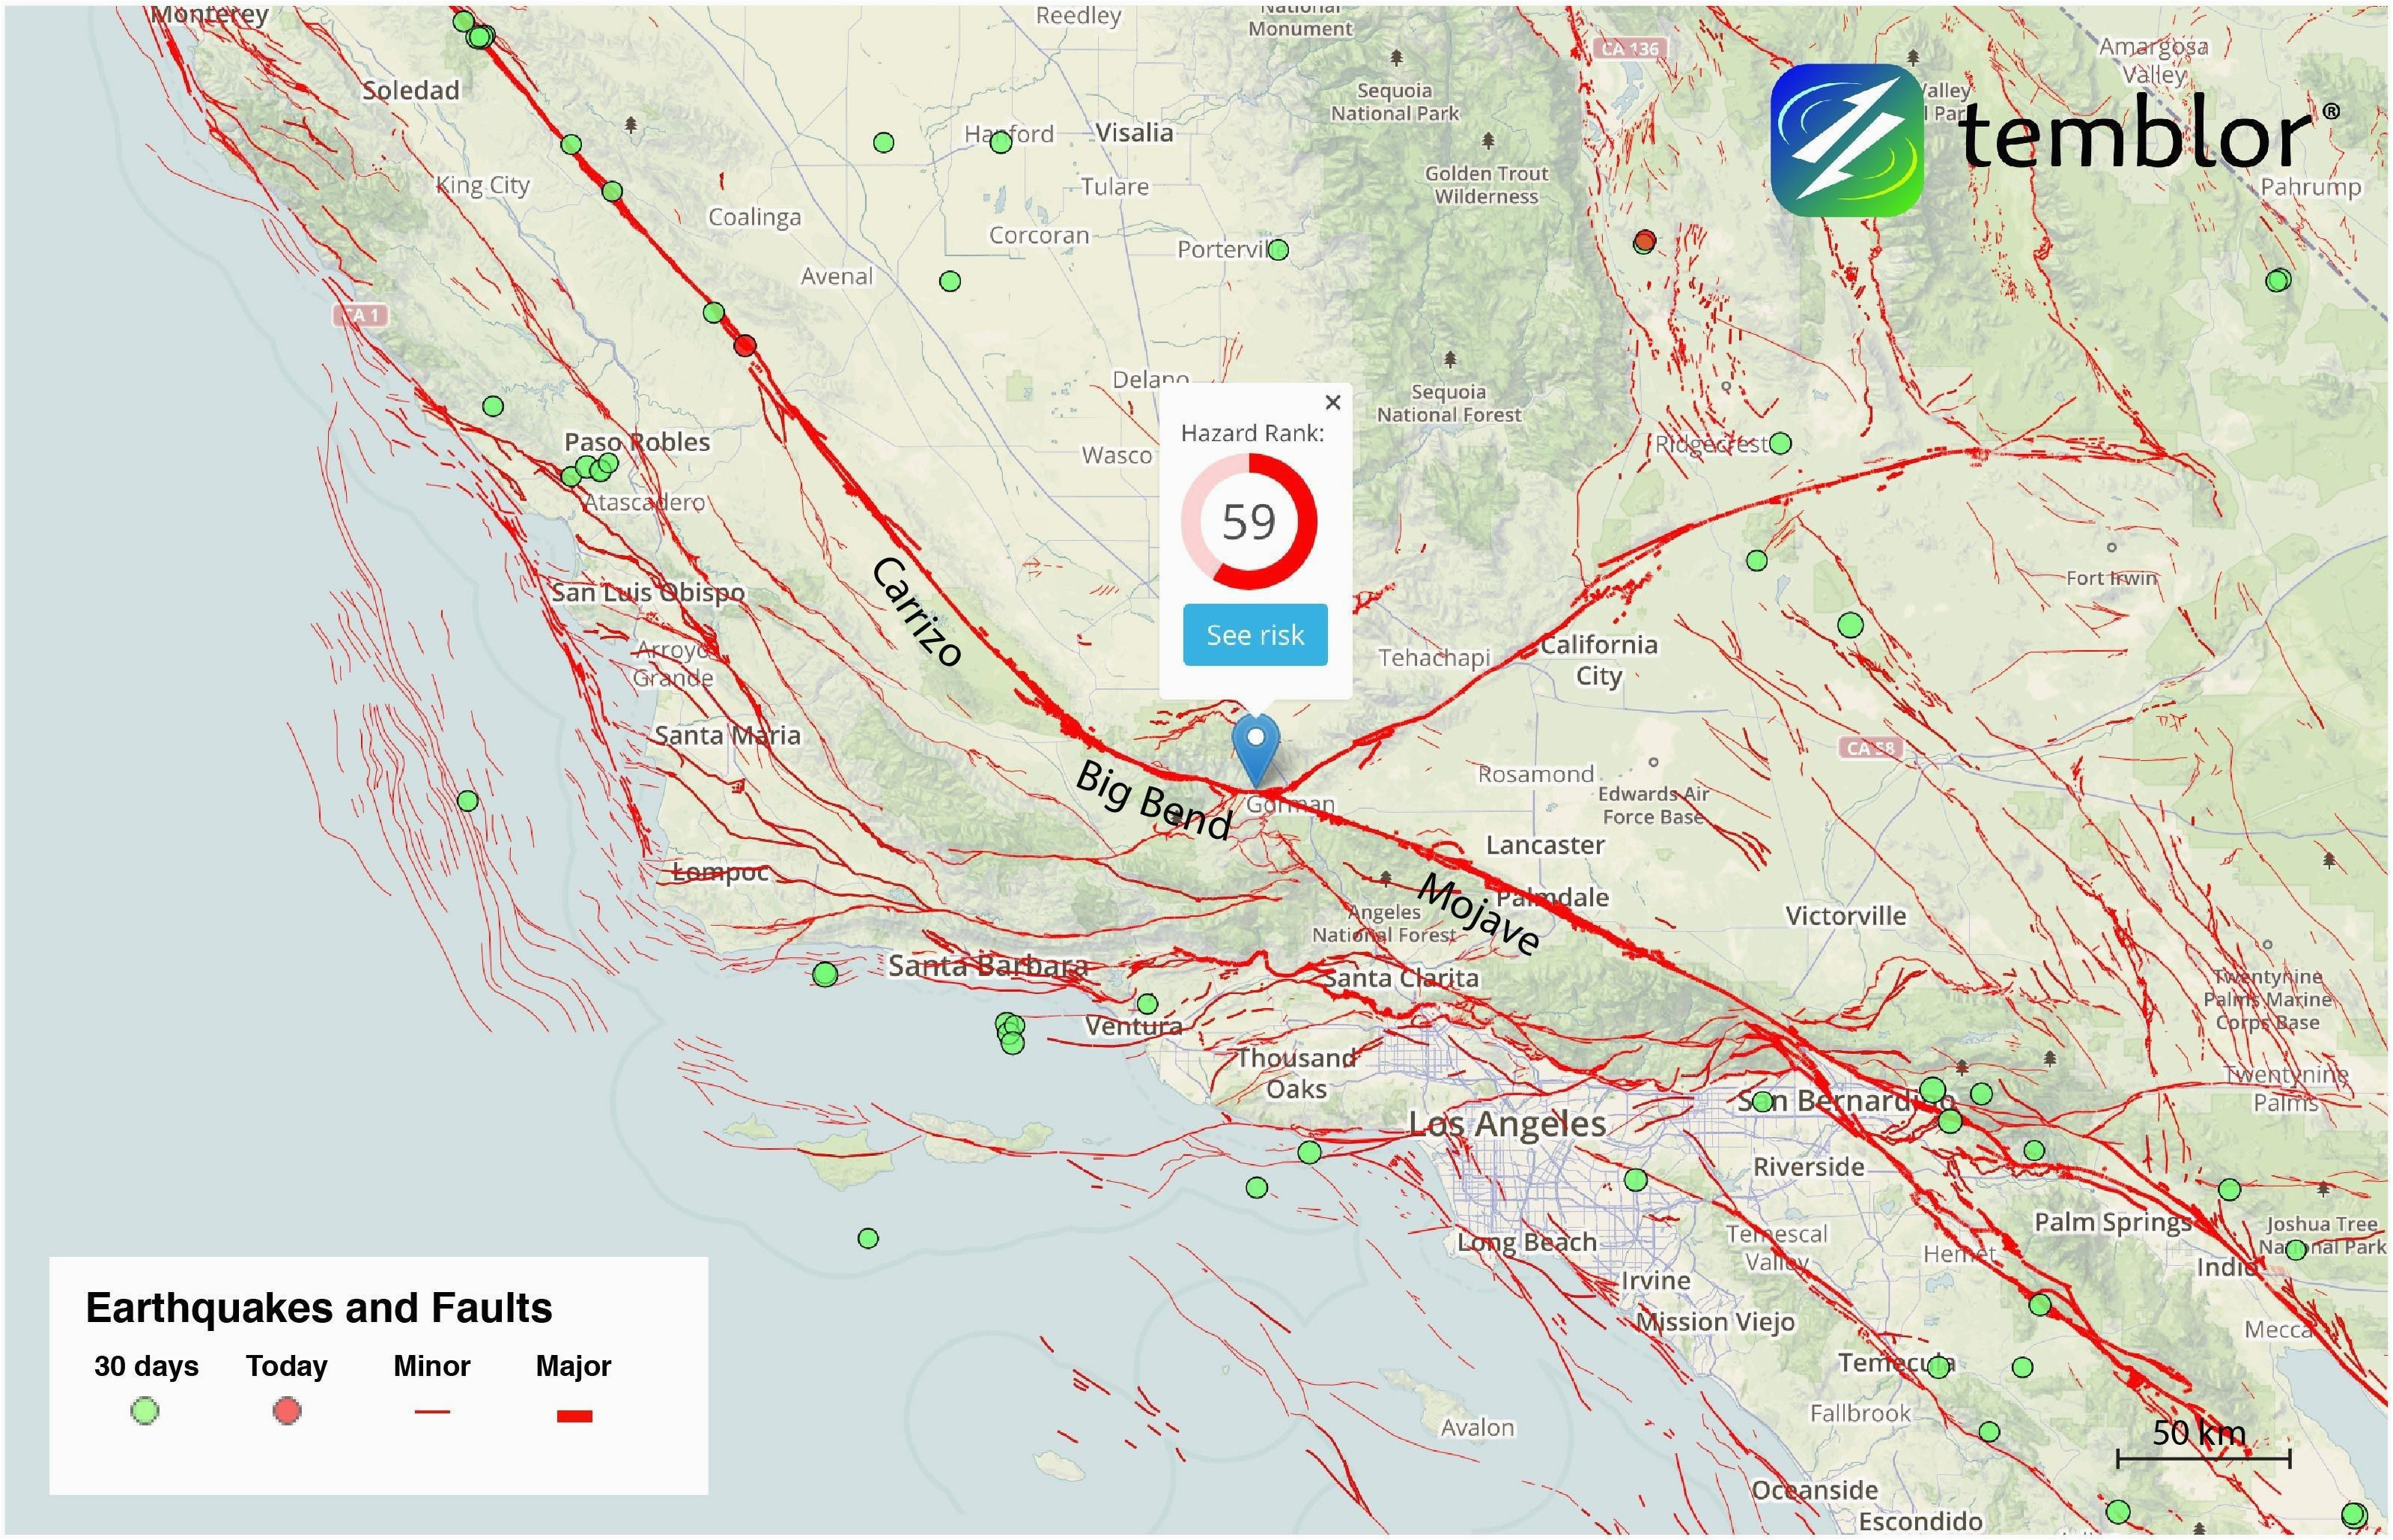 California Earthquake Faults Map Graph Fault Lines Map Map Canada And Us Large California Of California Earthquake Faults Map 